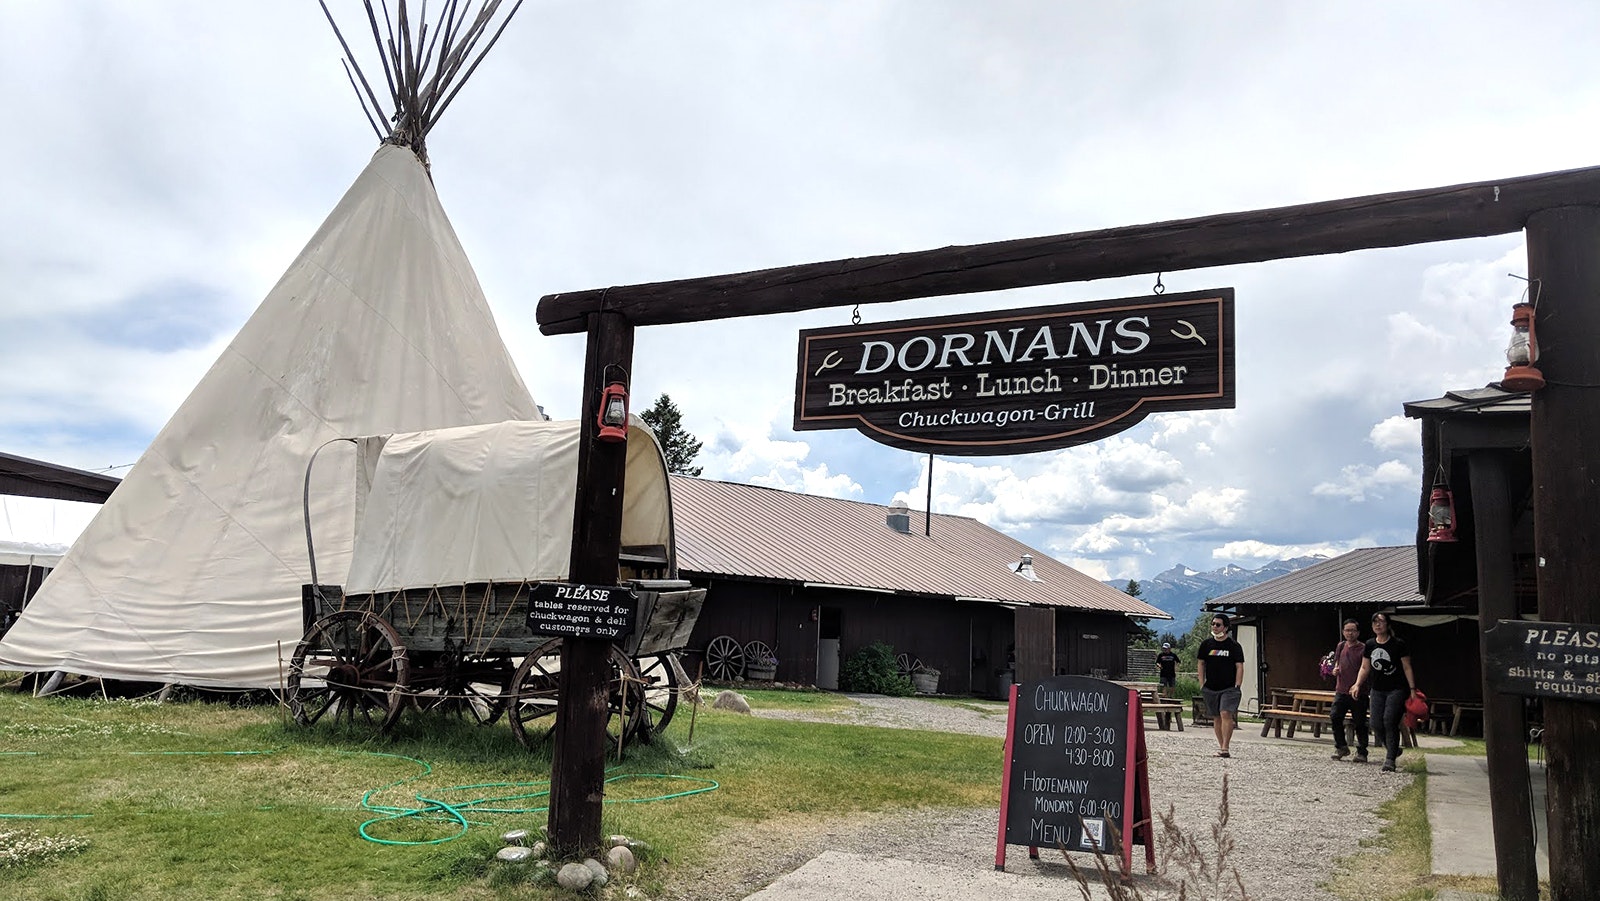 Dornan's in Grand Teton National Park has been doing it the family way for five generations over the past 100 years.